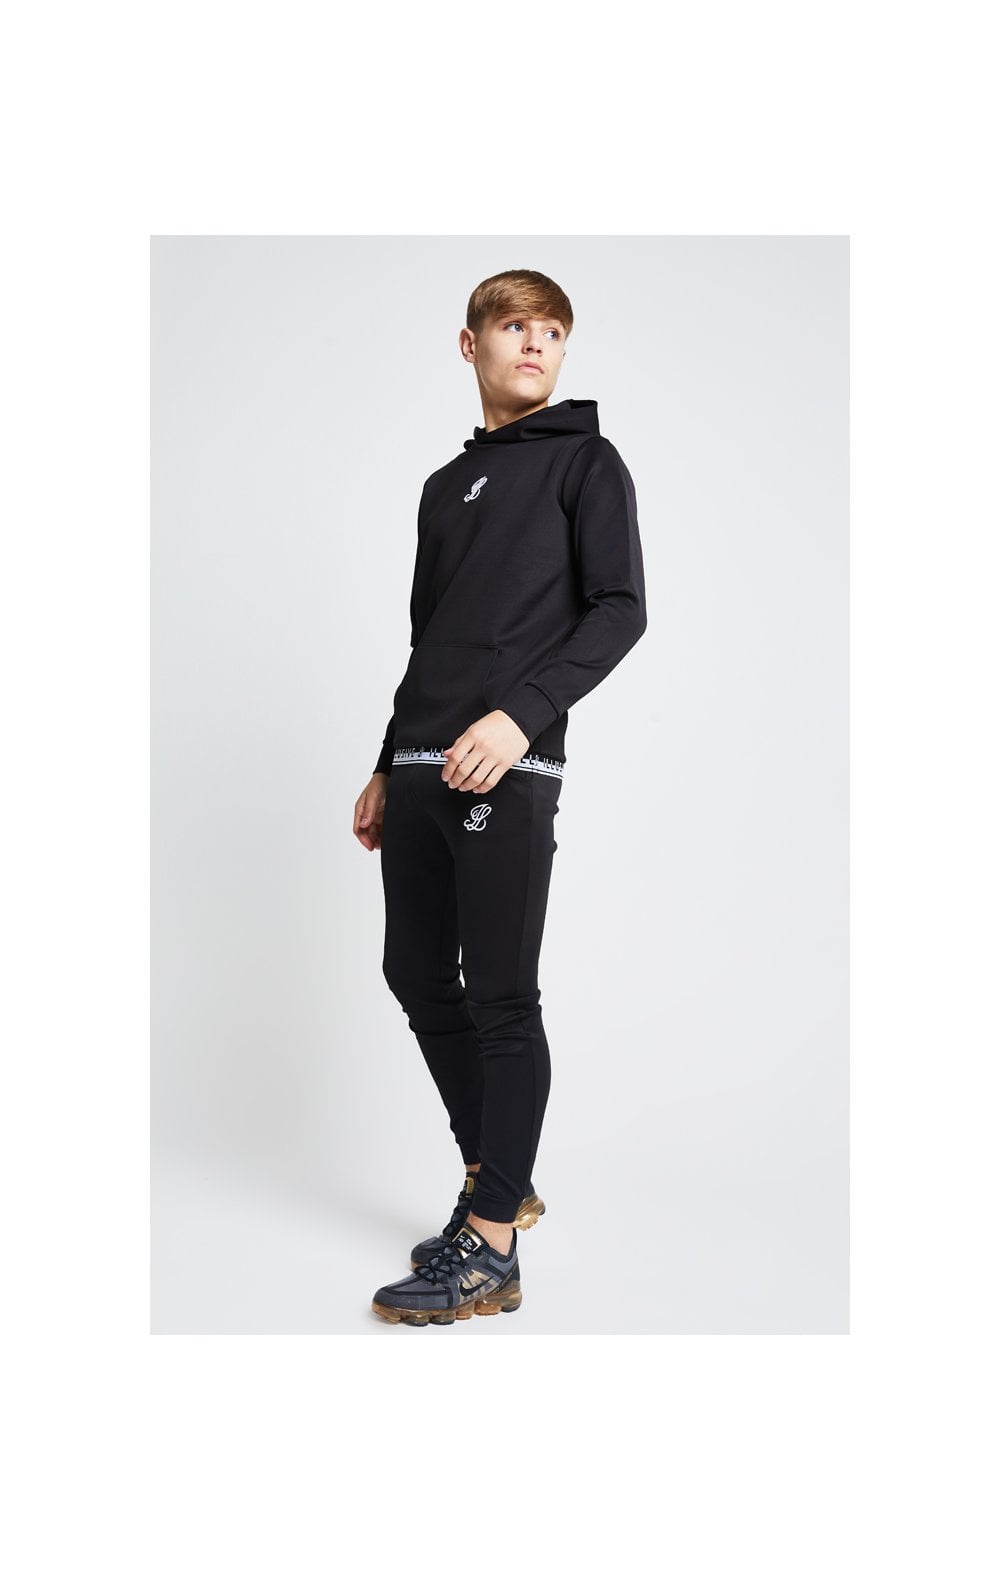 Load image into Gallery viewer, Illusive London Taped Overhead Hoodie - Black (2)